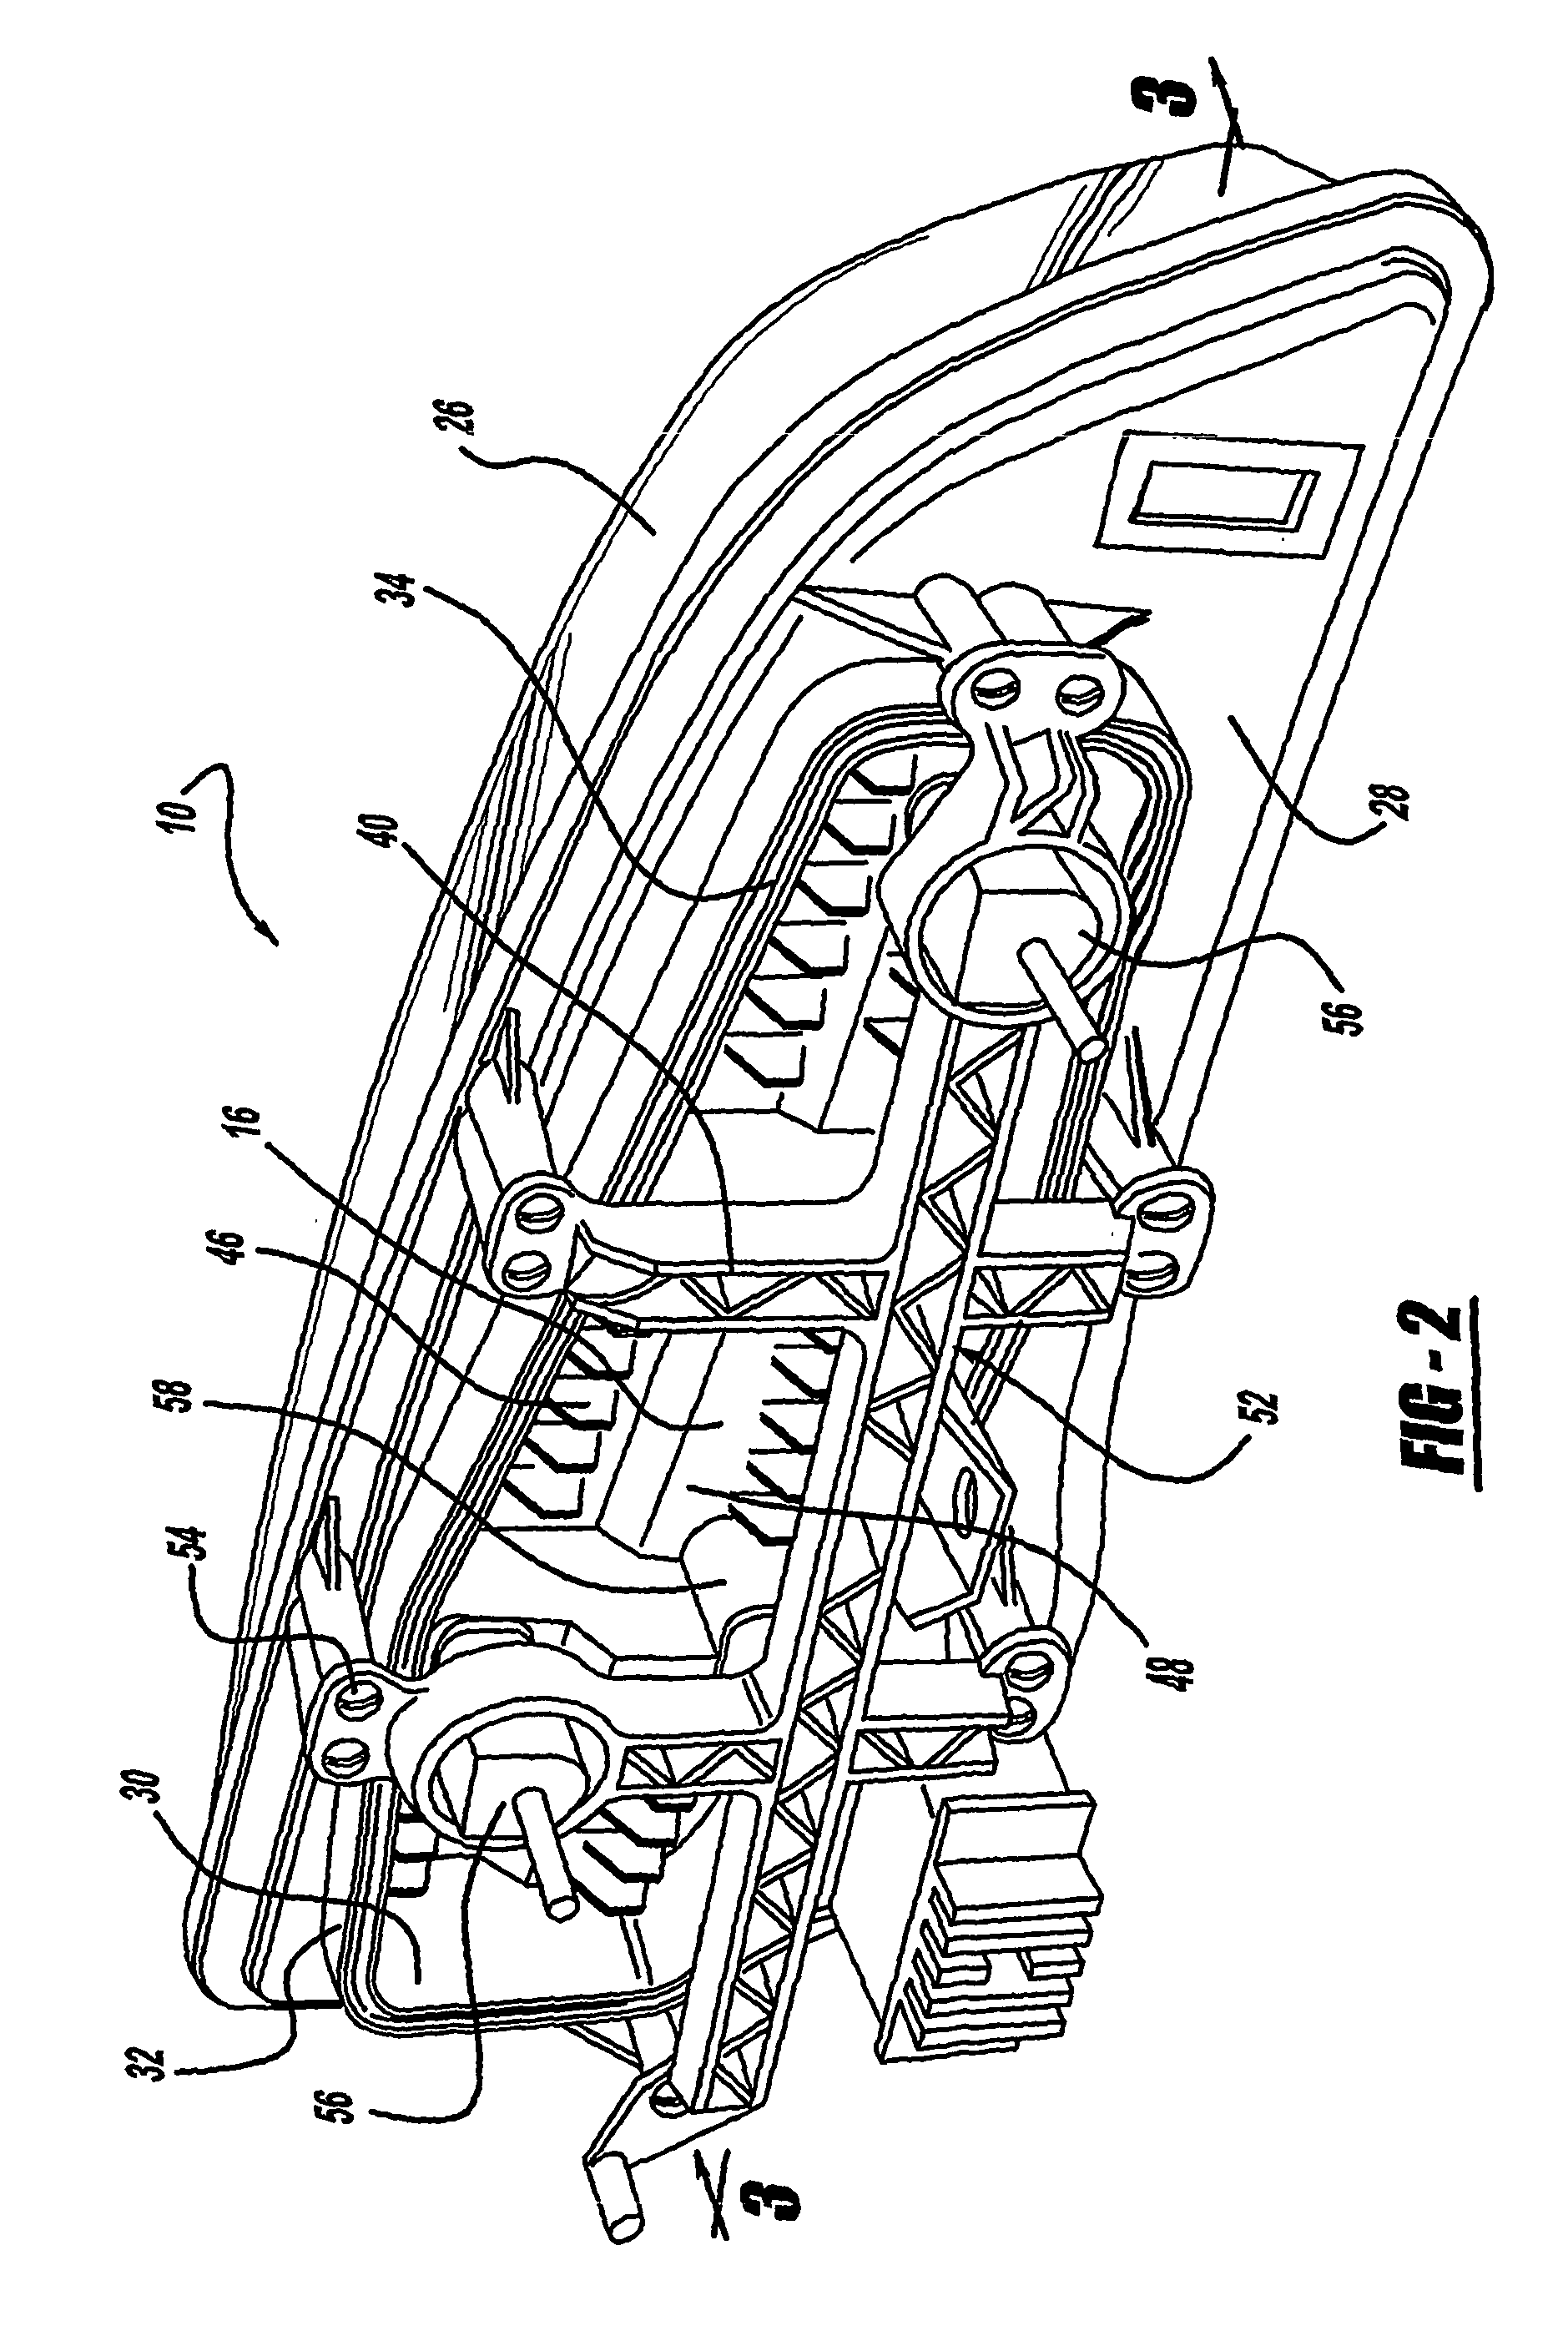 Apparatus and method for mounting and adjusting LED headlamps